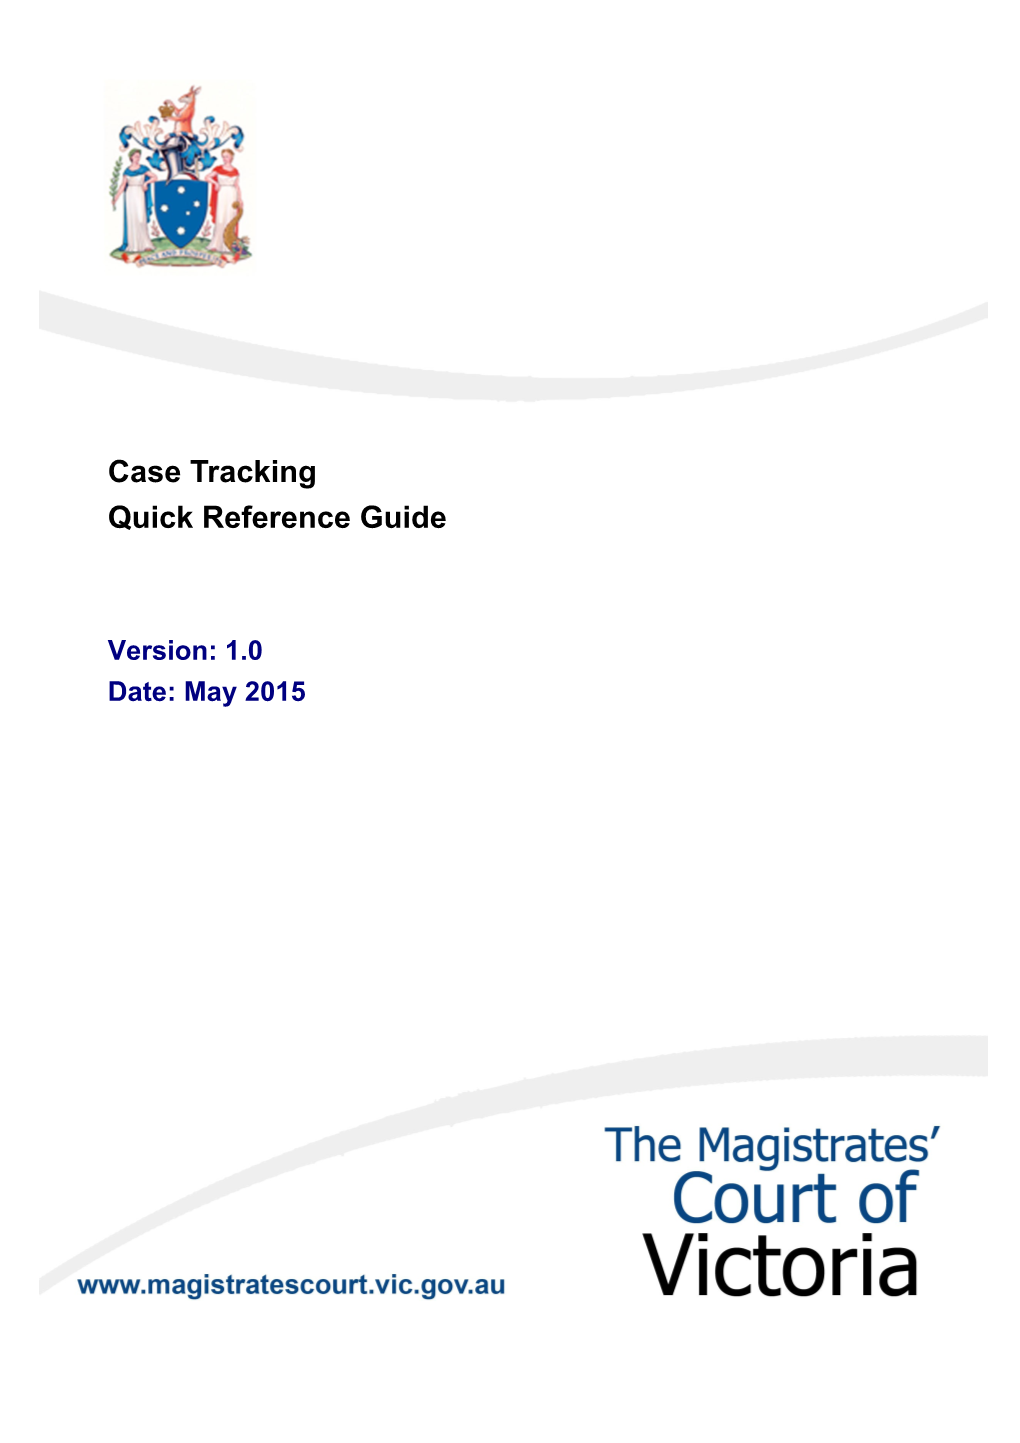 1.Case Tracking in the Magistrates Court of Victoria